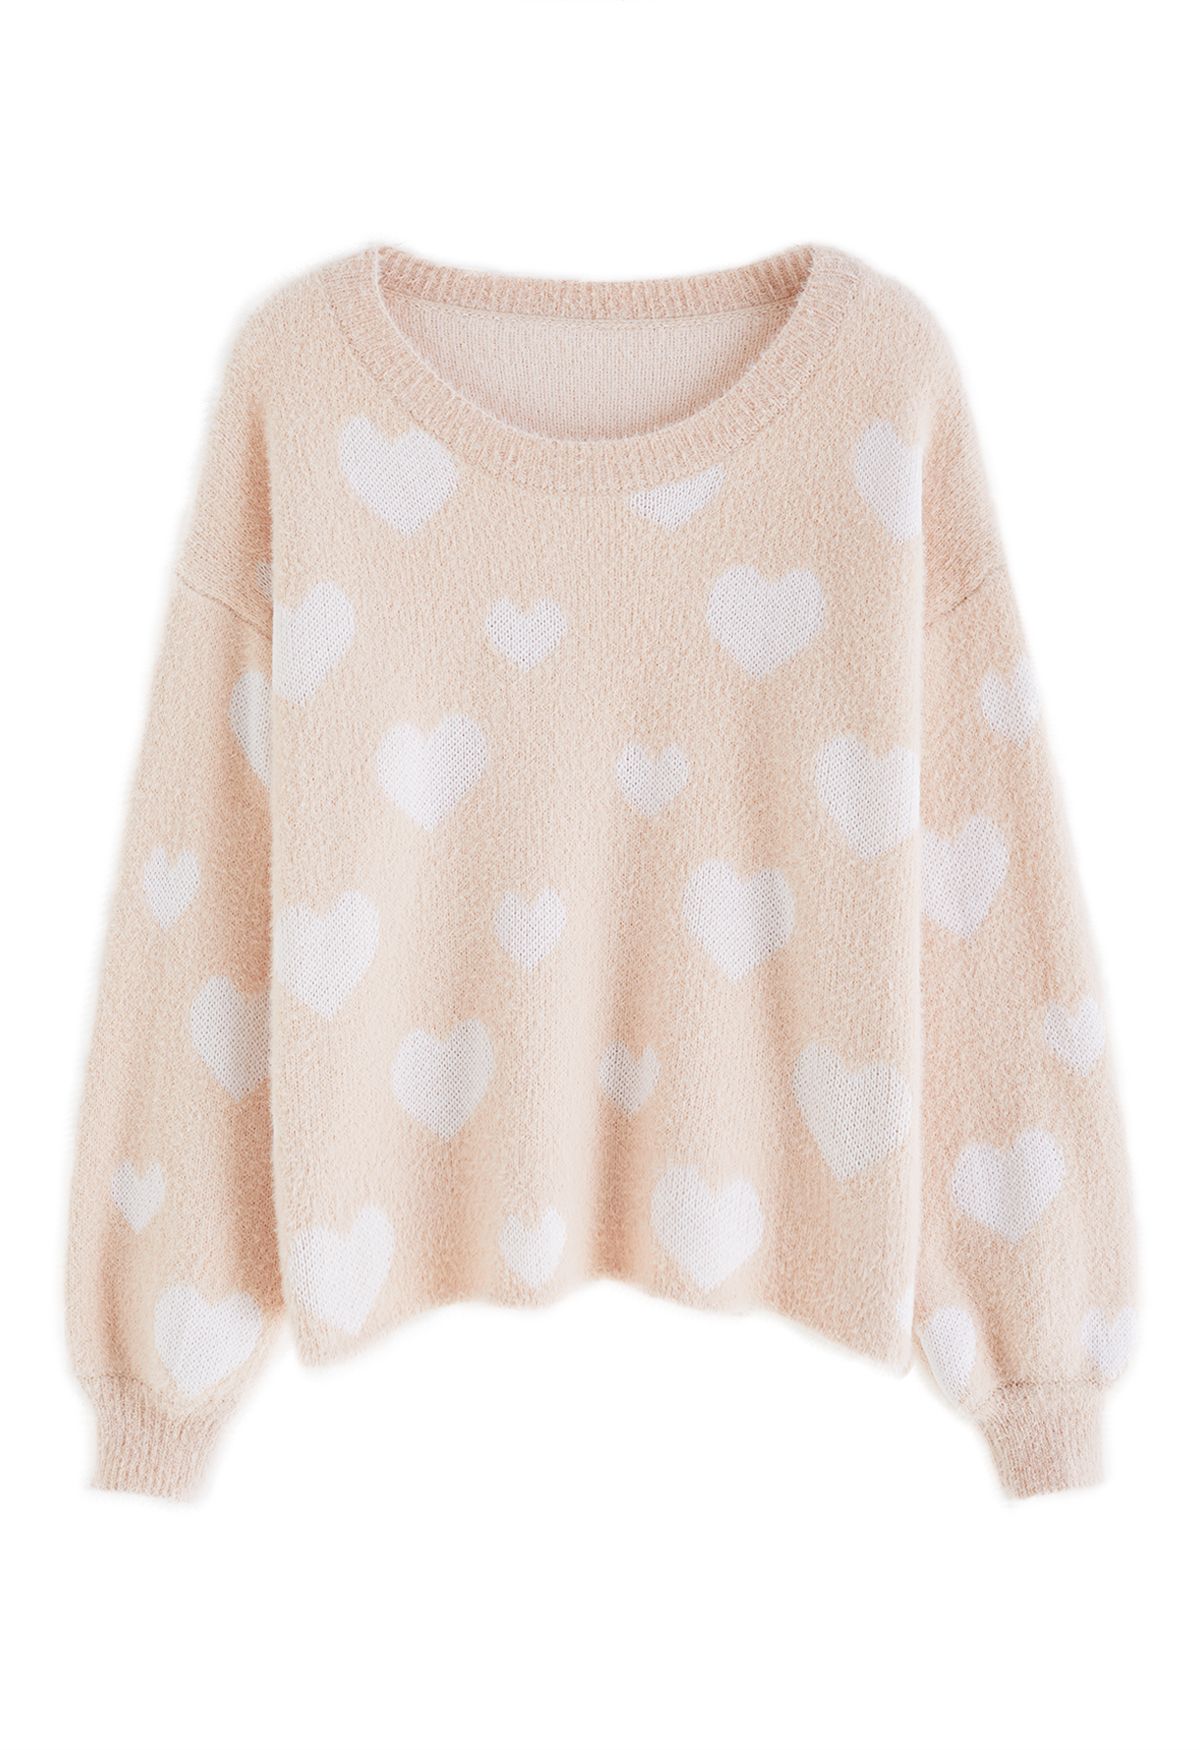 Fuzzy Contrast Heart Strickpullover in Nude Pink